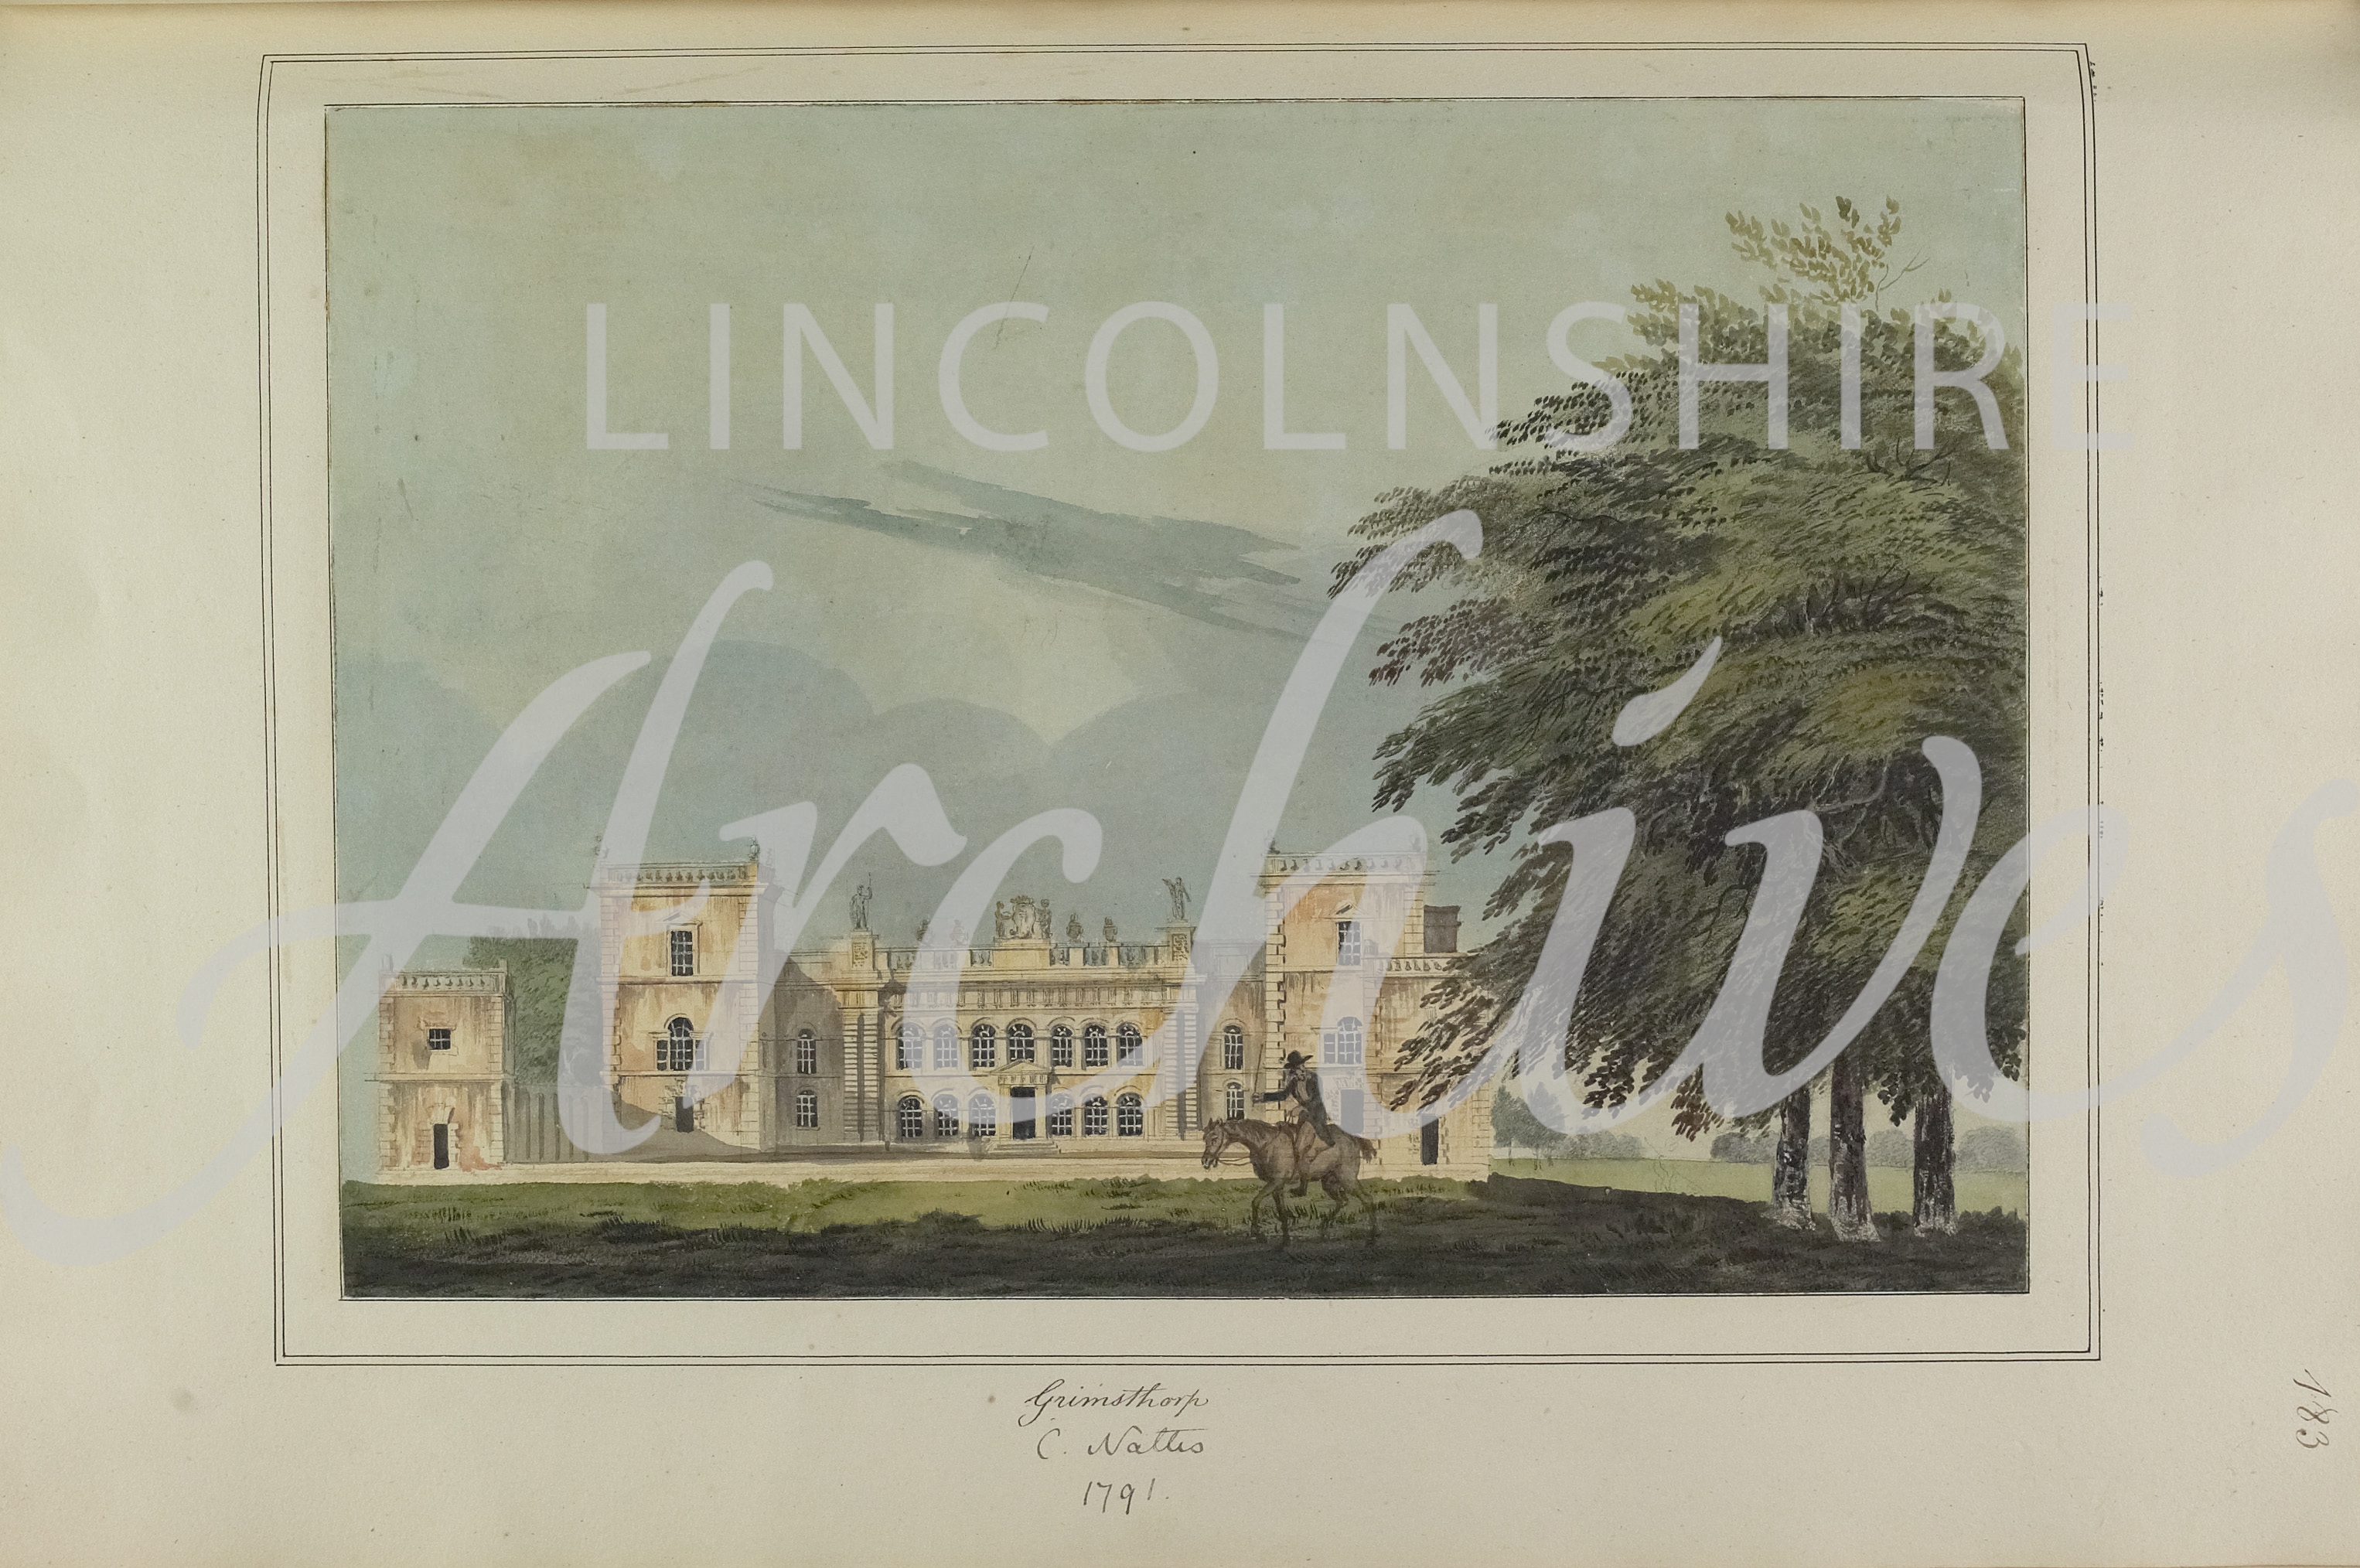 Drawings etc of Lincolnshire Churches, houses etc, mainly by C Nattes